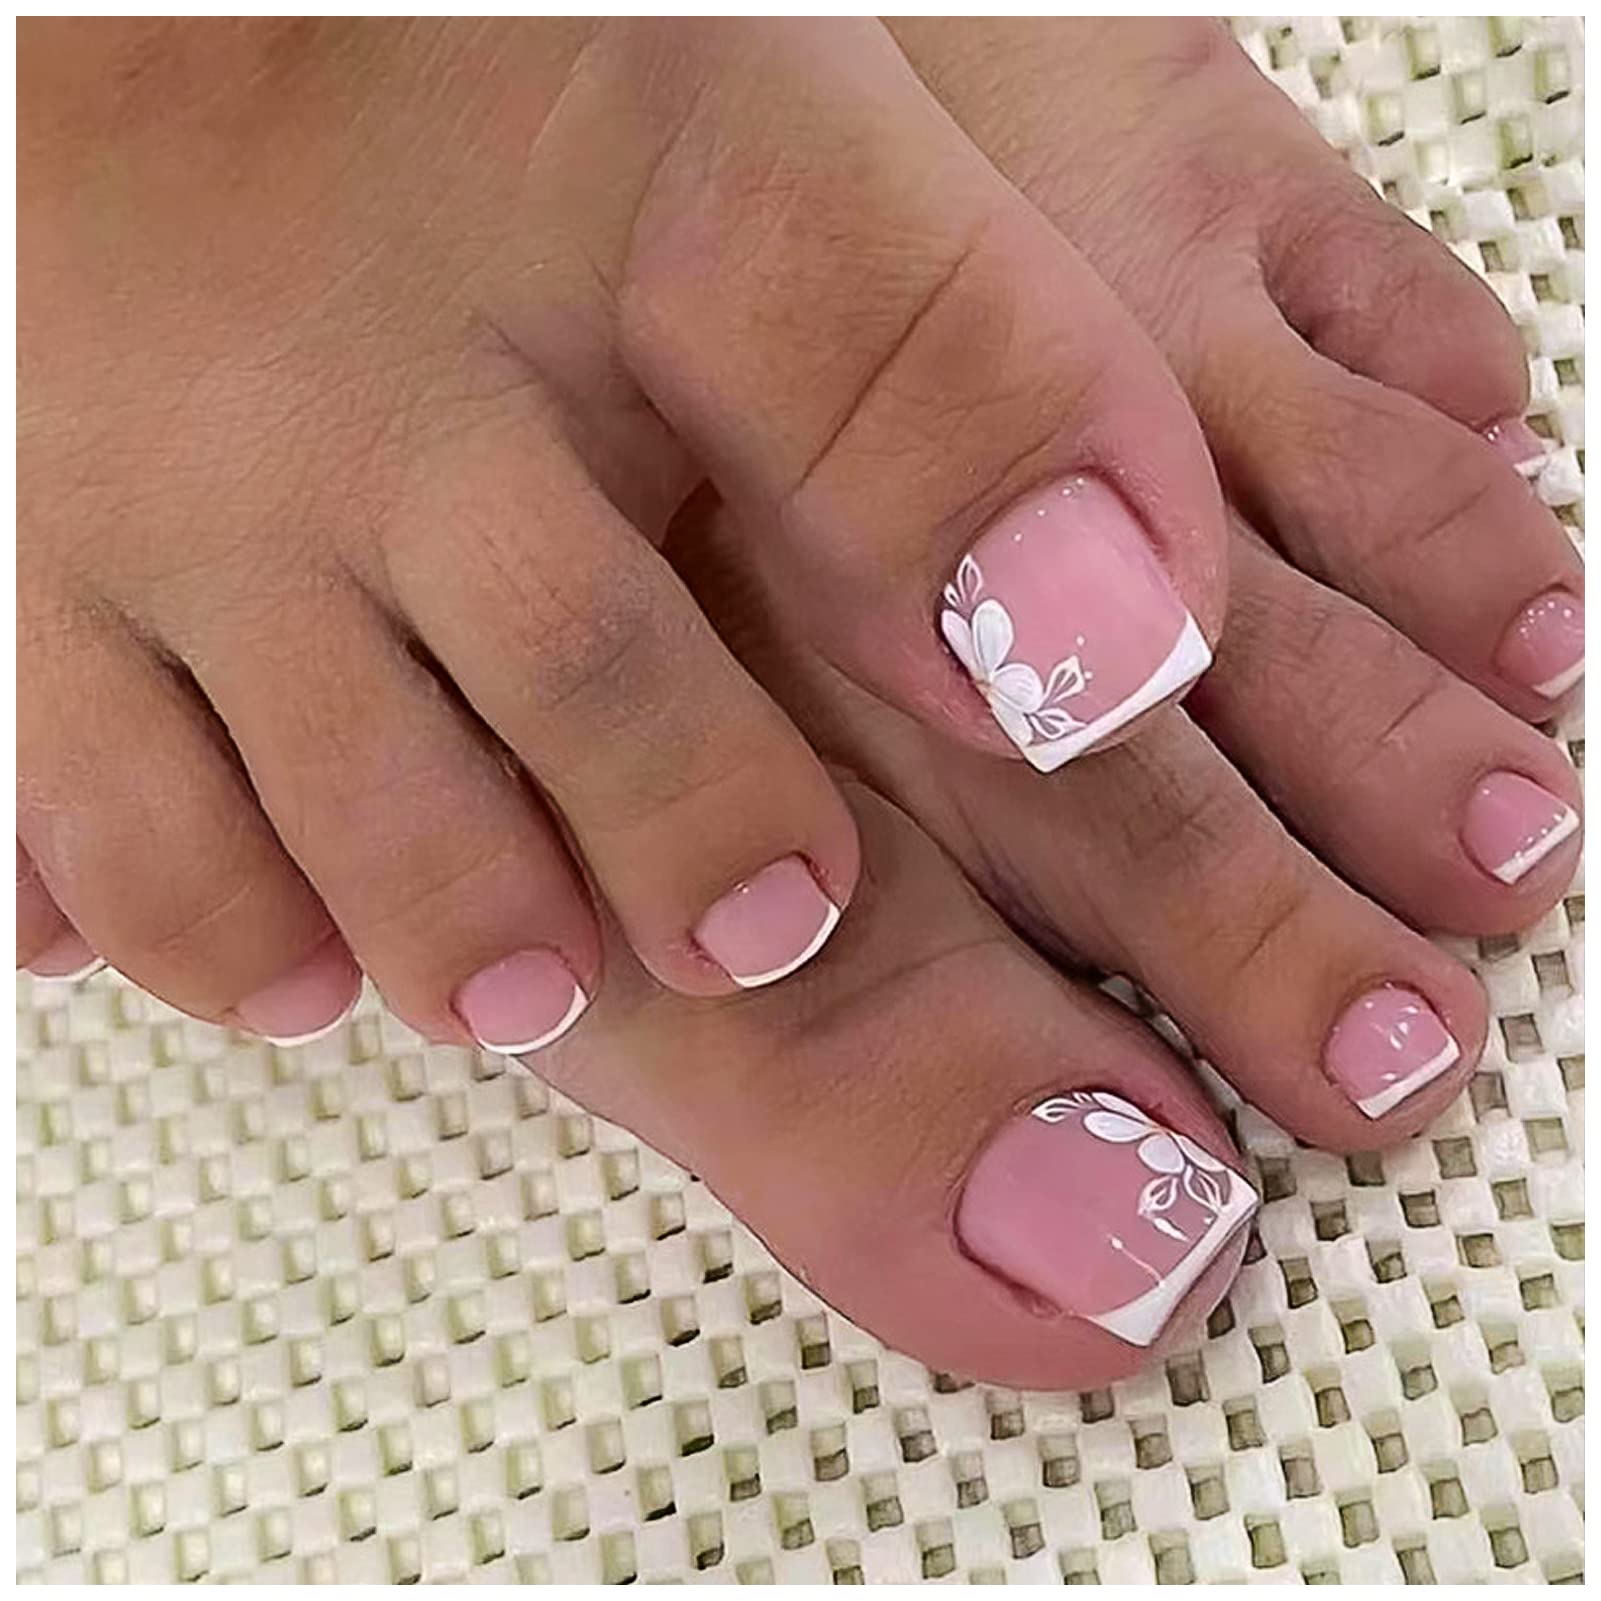 Hot Pink and White French Pedicure Wedding Toes Art Design Lace Details  Tutorial Advanced - YouTube